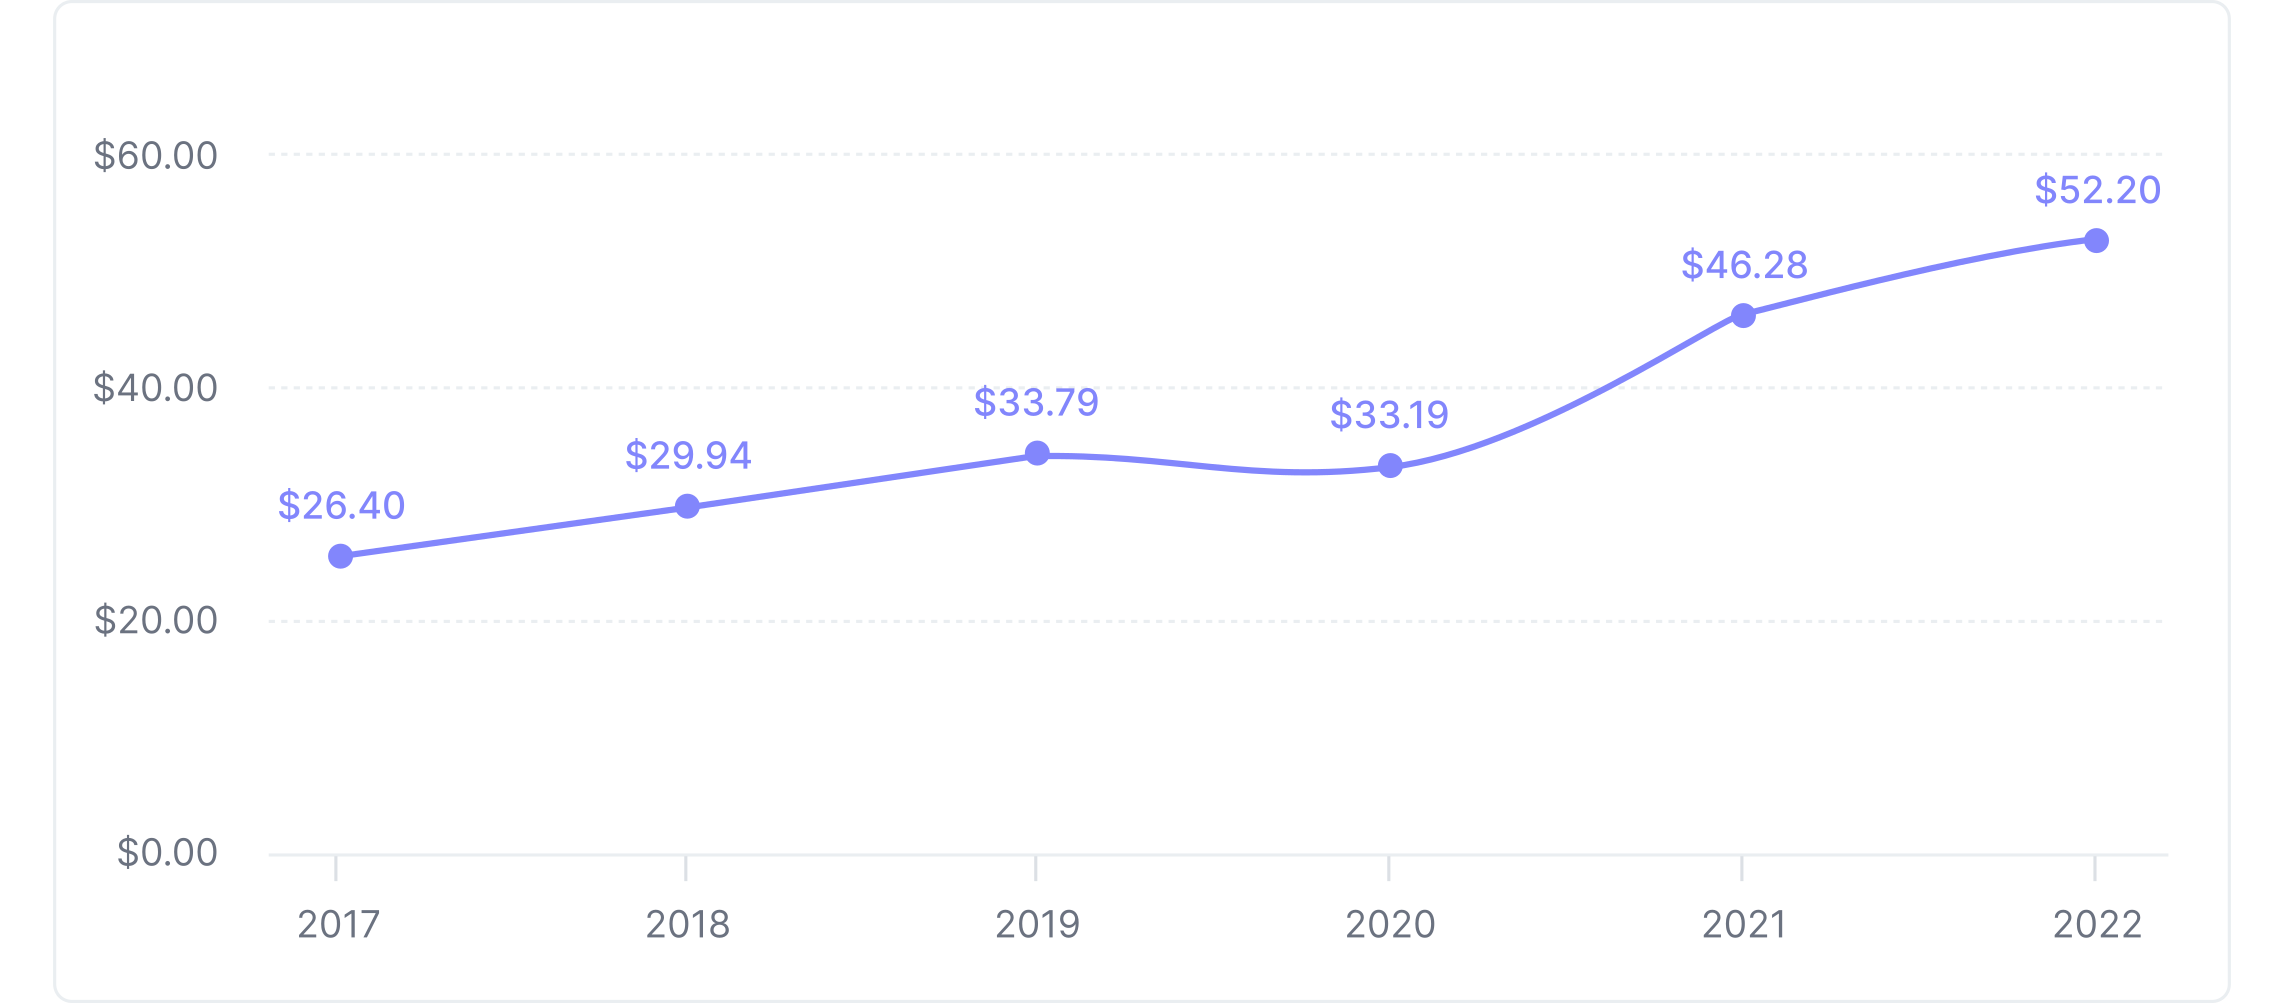 Google's ARPU growth graph from 2017 to 2022.